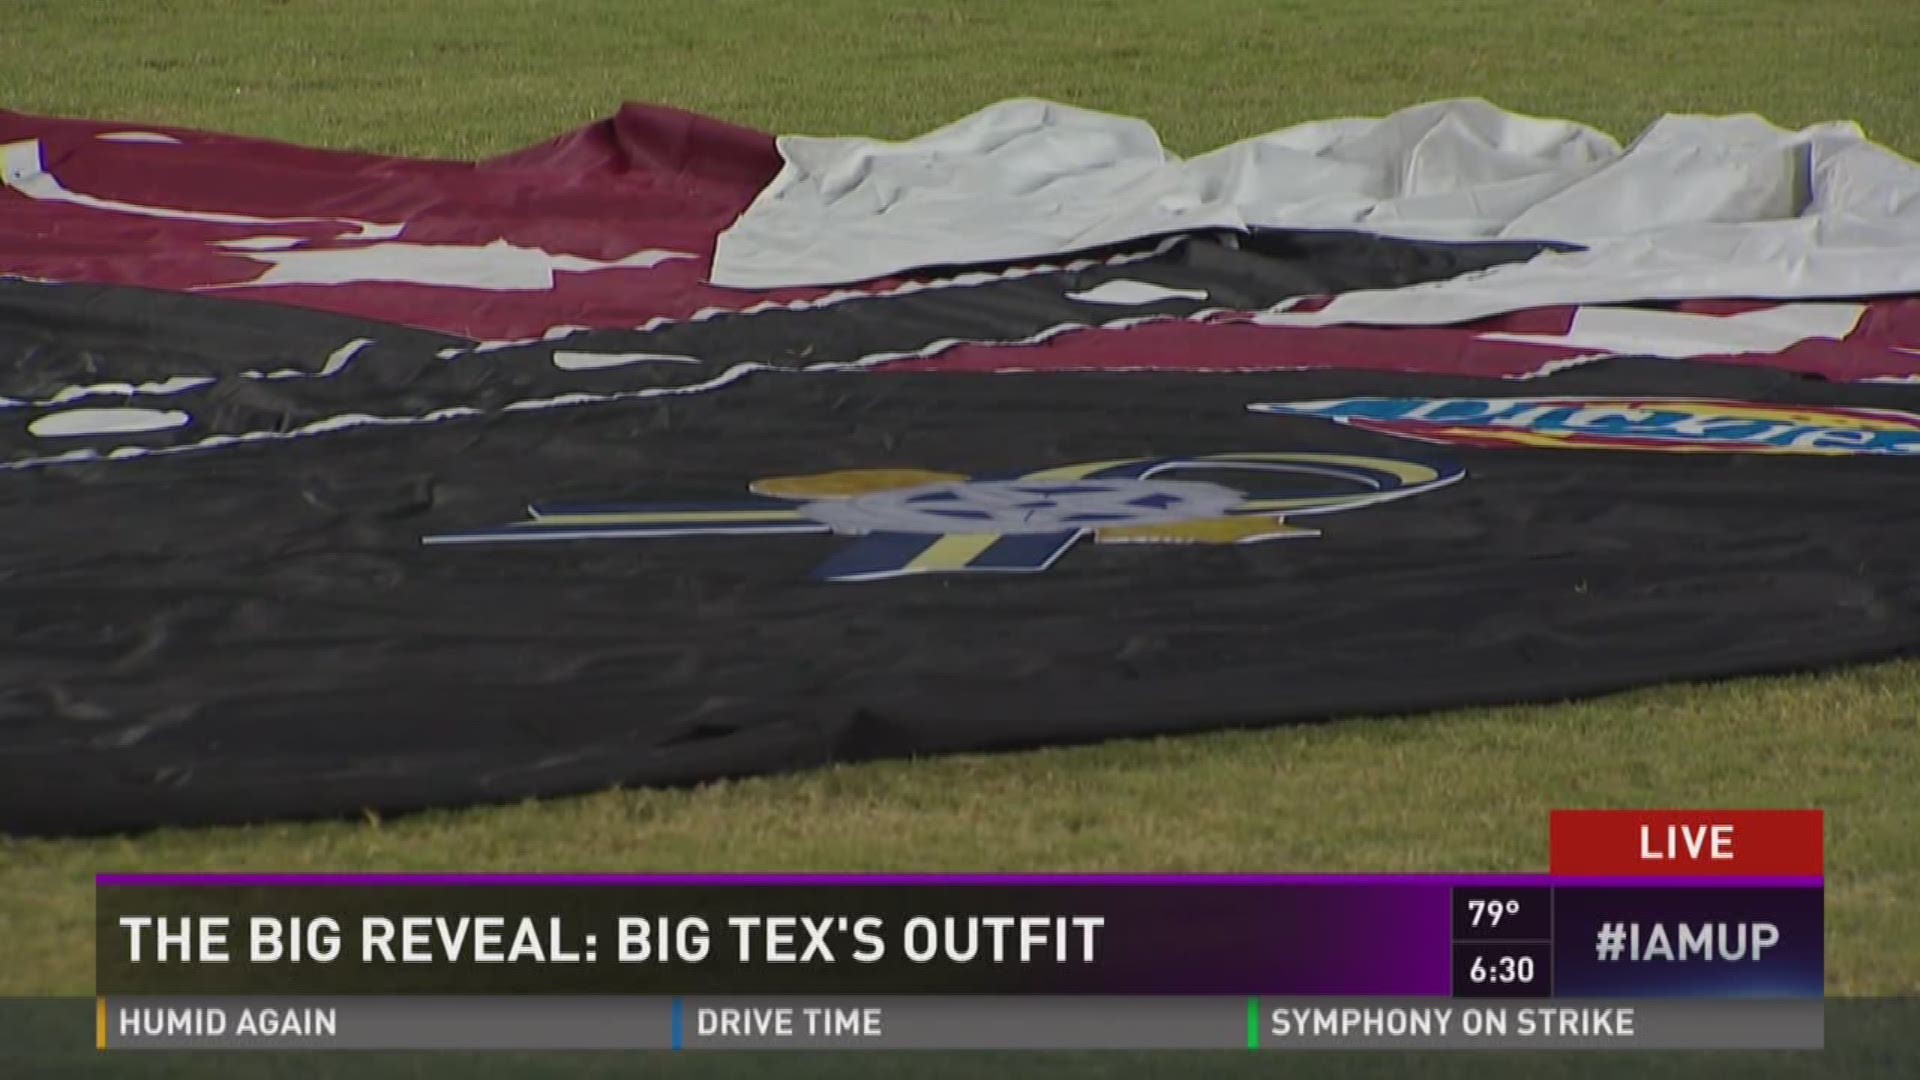 Big Tex's outfit for the 2016 State Fair of Texas was revealed on Friday morning -- and it included a nod to the five Dallas police officers killed in the ambush downtown on July 7.